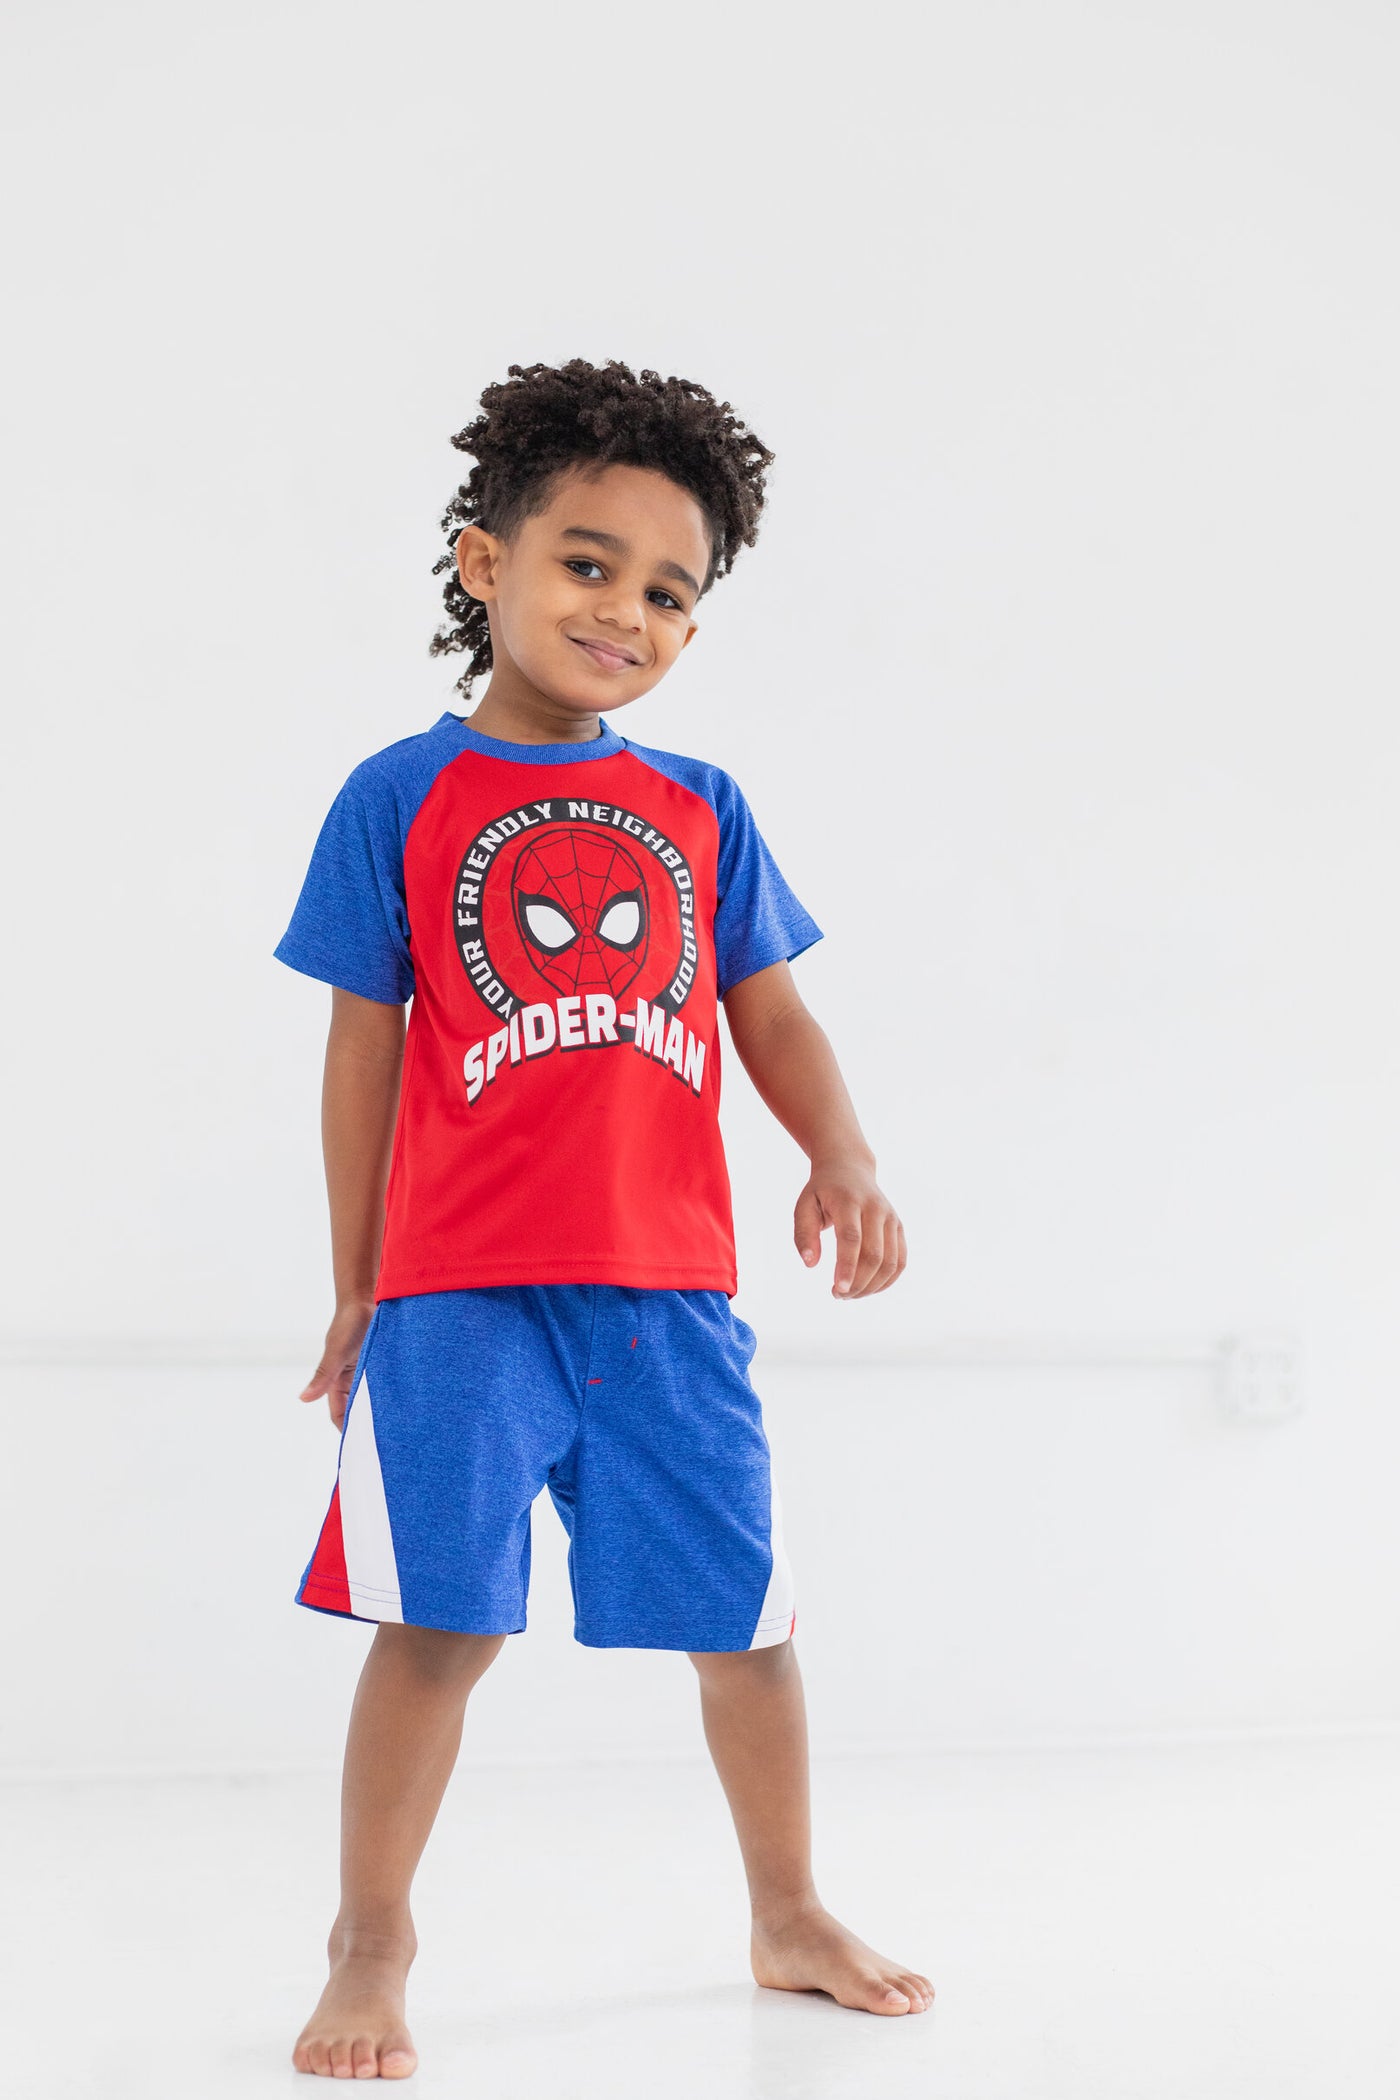 Marvel Spider-Man T-Shirt Tank Top and Shorts 3 Piece Outfit Set Toddler to Big Kid